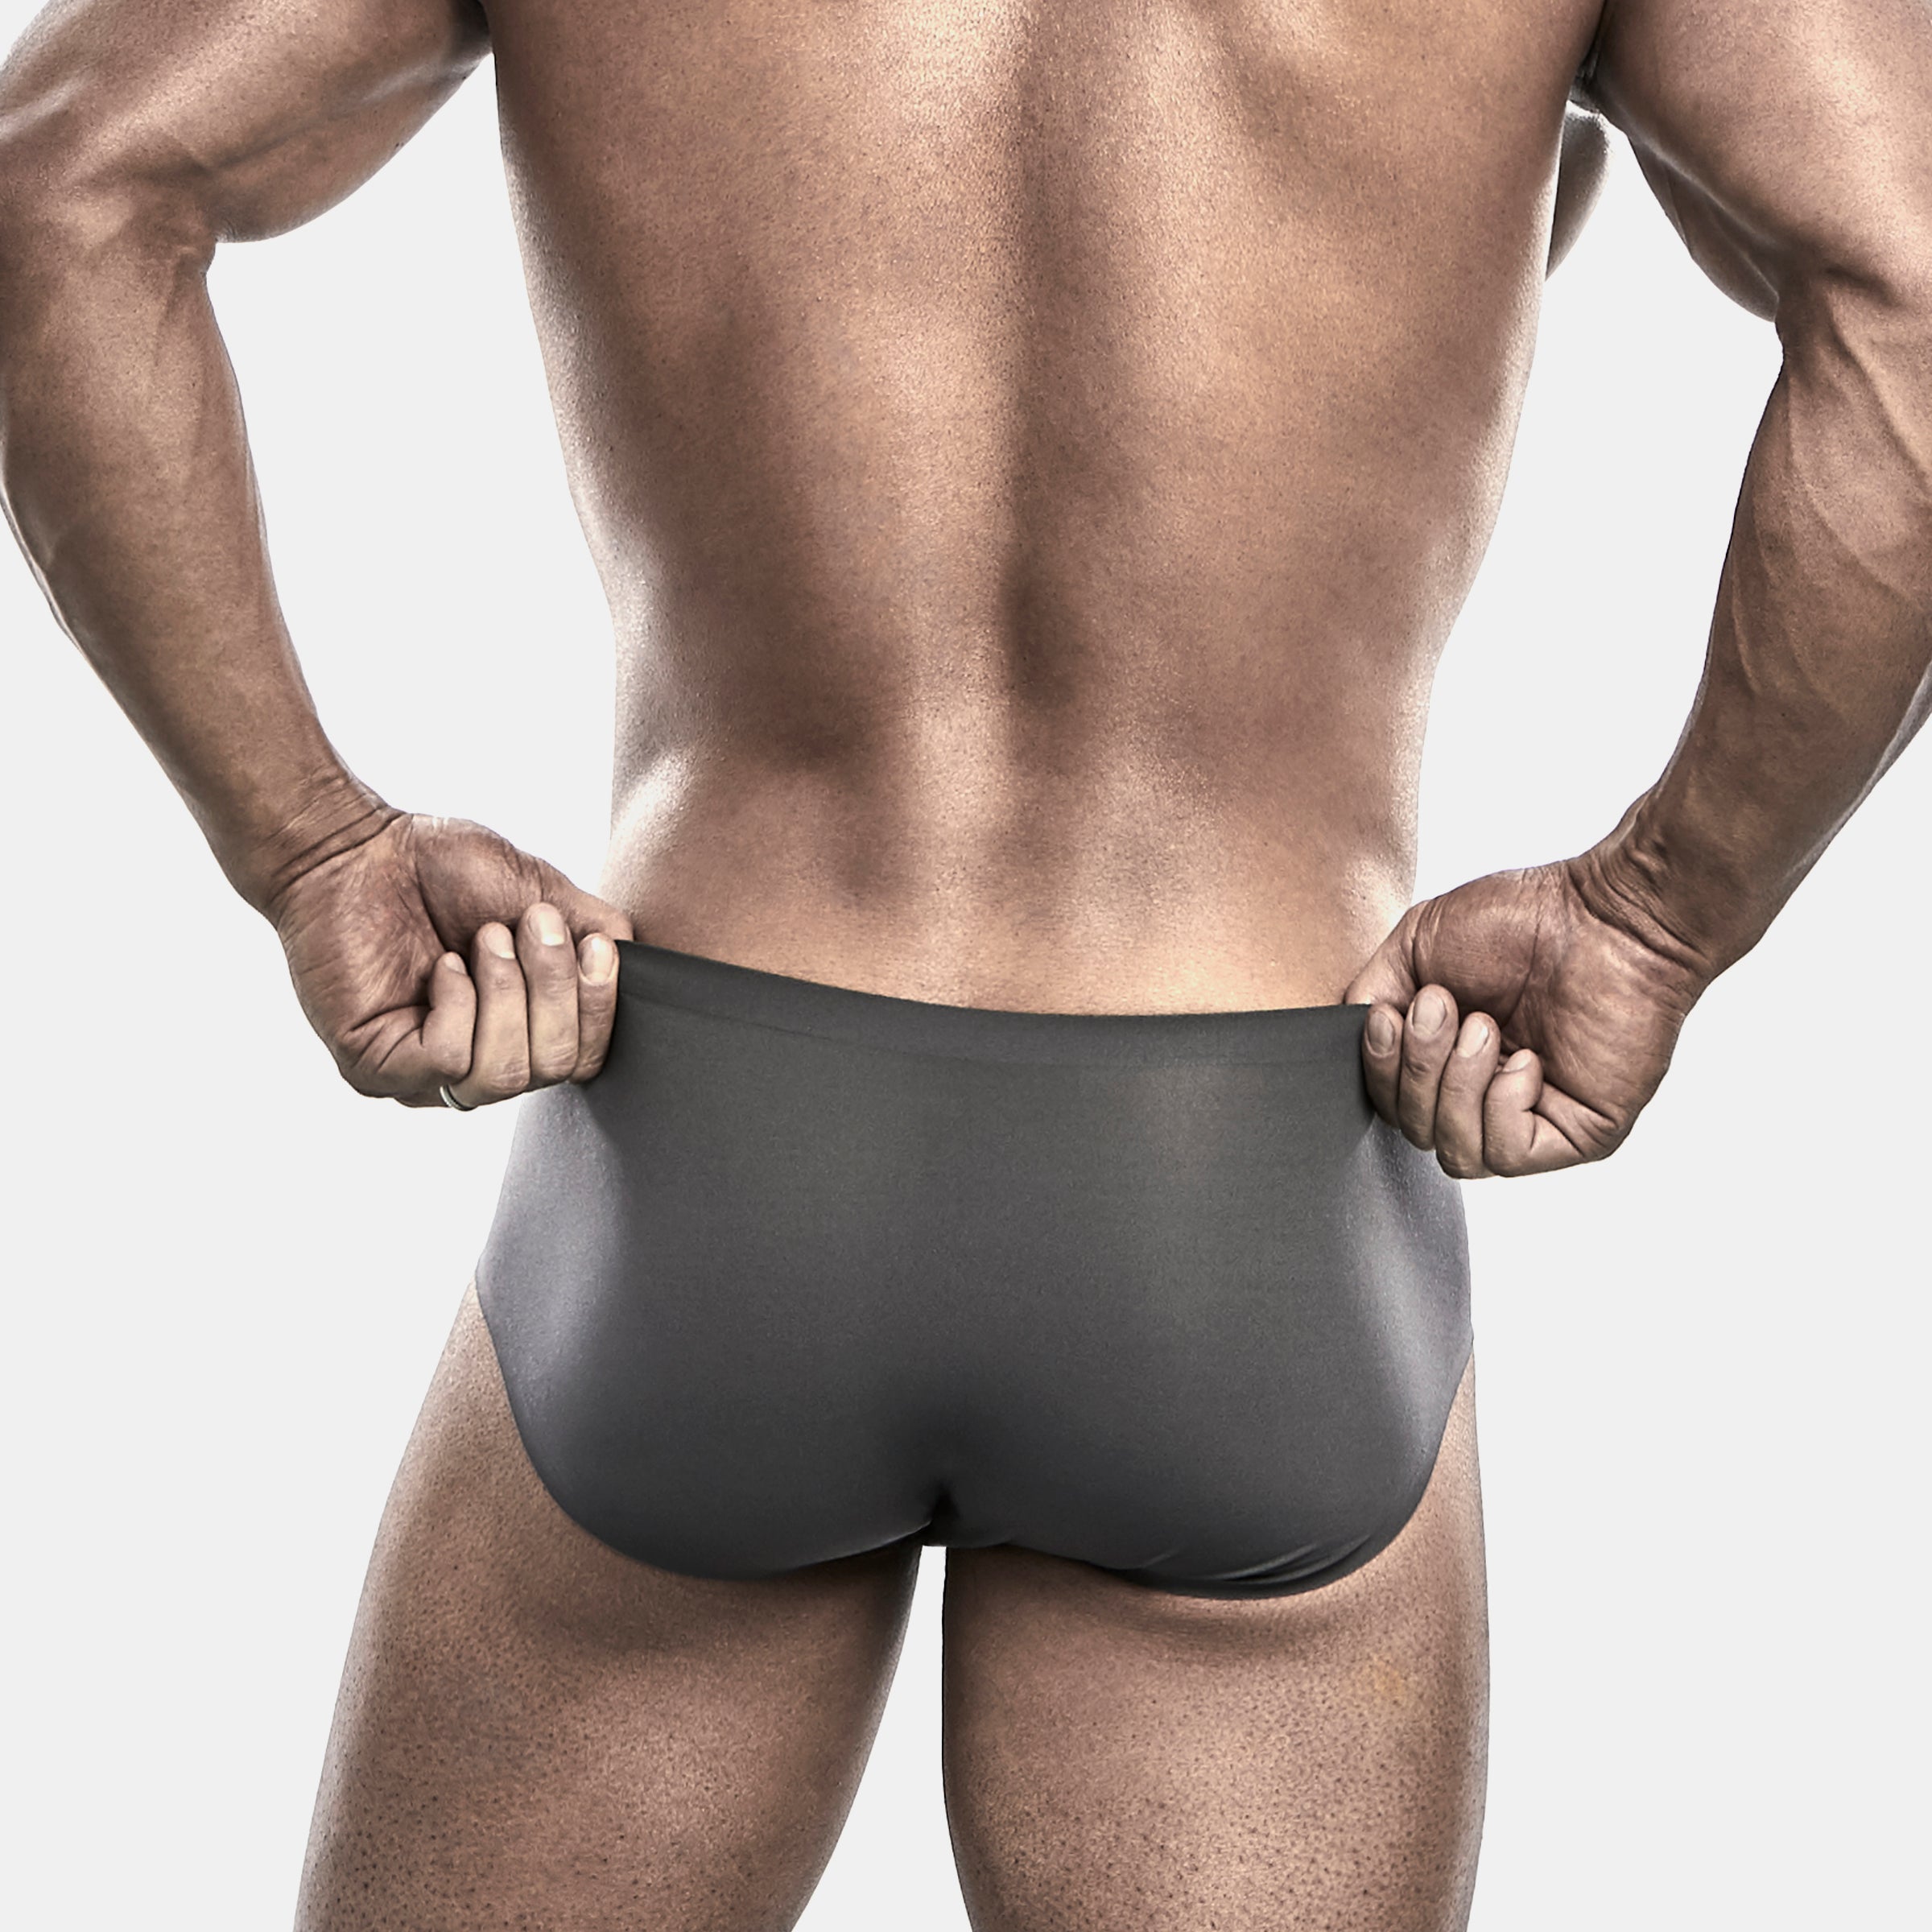 AsWeMove  Welcome to the Future of Men's Underwear